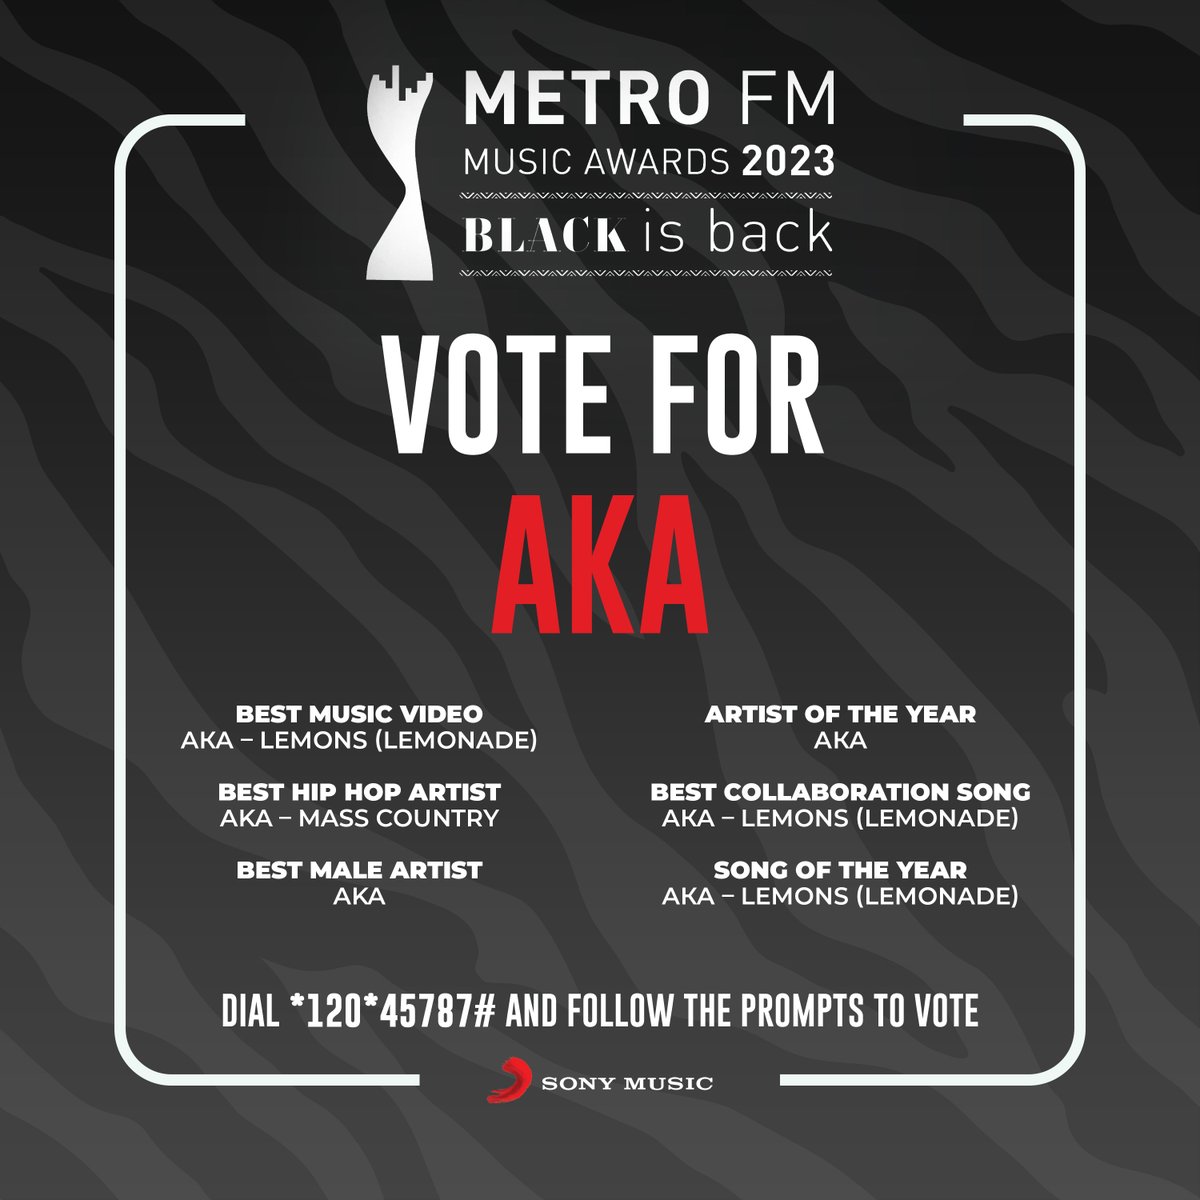 Back at it with @METROFMSA Awards and the voting lines are now open. Vote for @akaworldwide in the following categories 
#BestMusicVideo
#ArtistOfTheYear
#BestHipHopArtist
#BestCollaborationSong
#BestMaleArtist
#SongOfTheYear